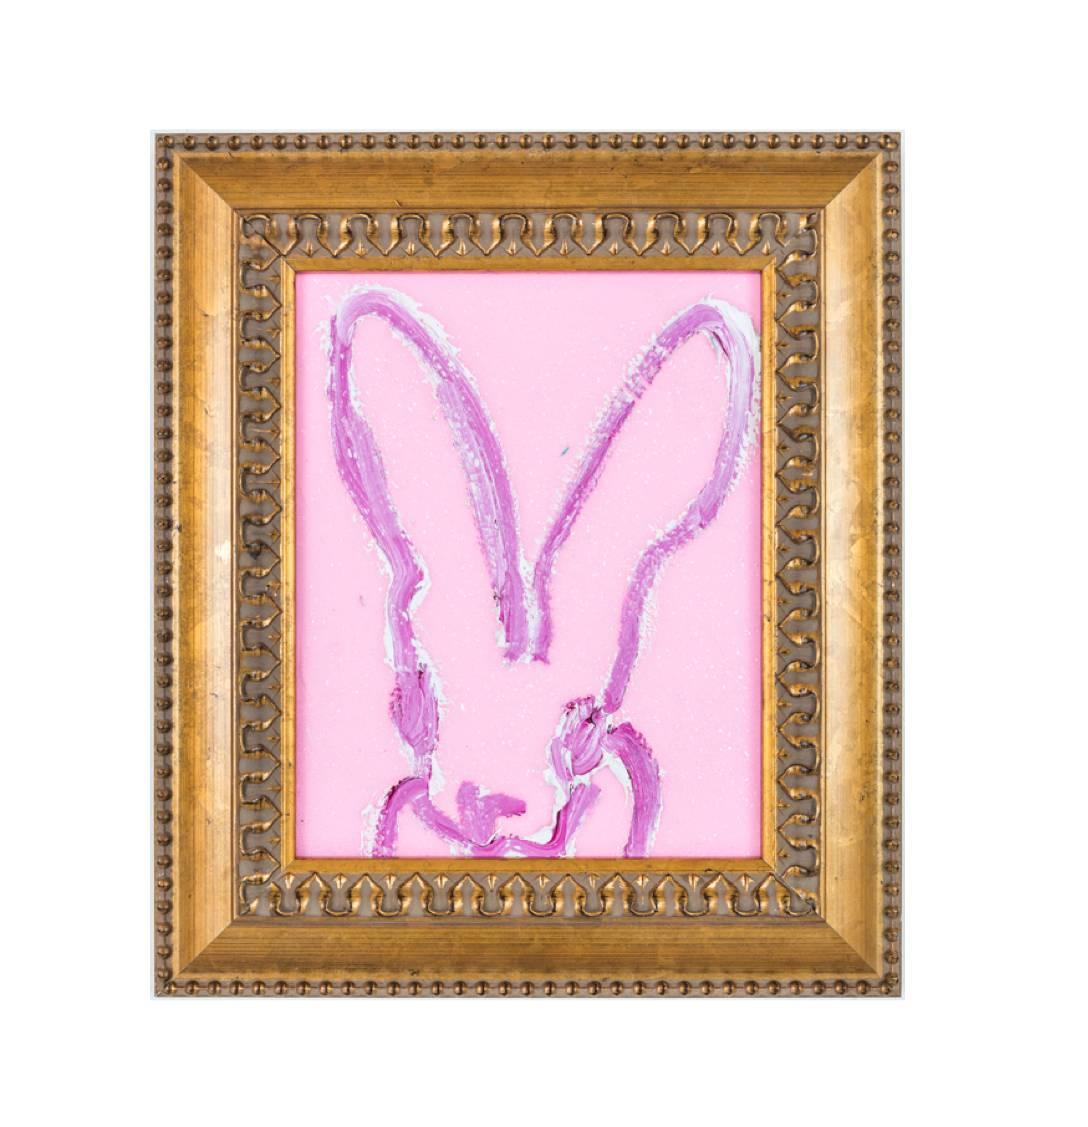 Pink diamond dust bunny - Painting by Hunt Slonem